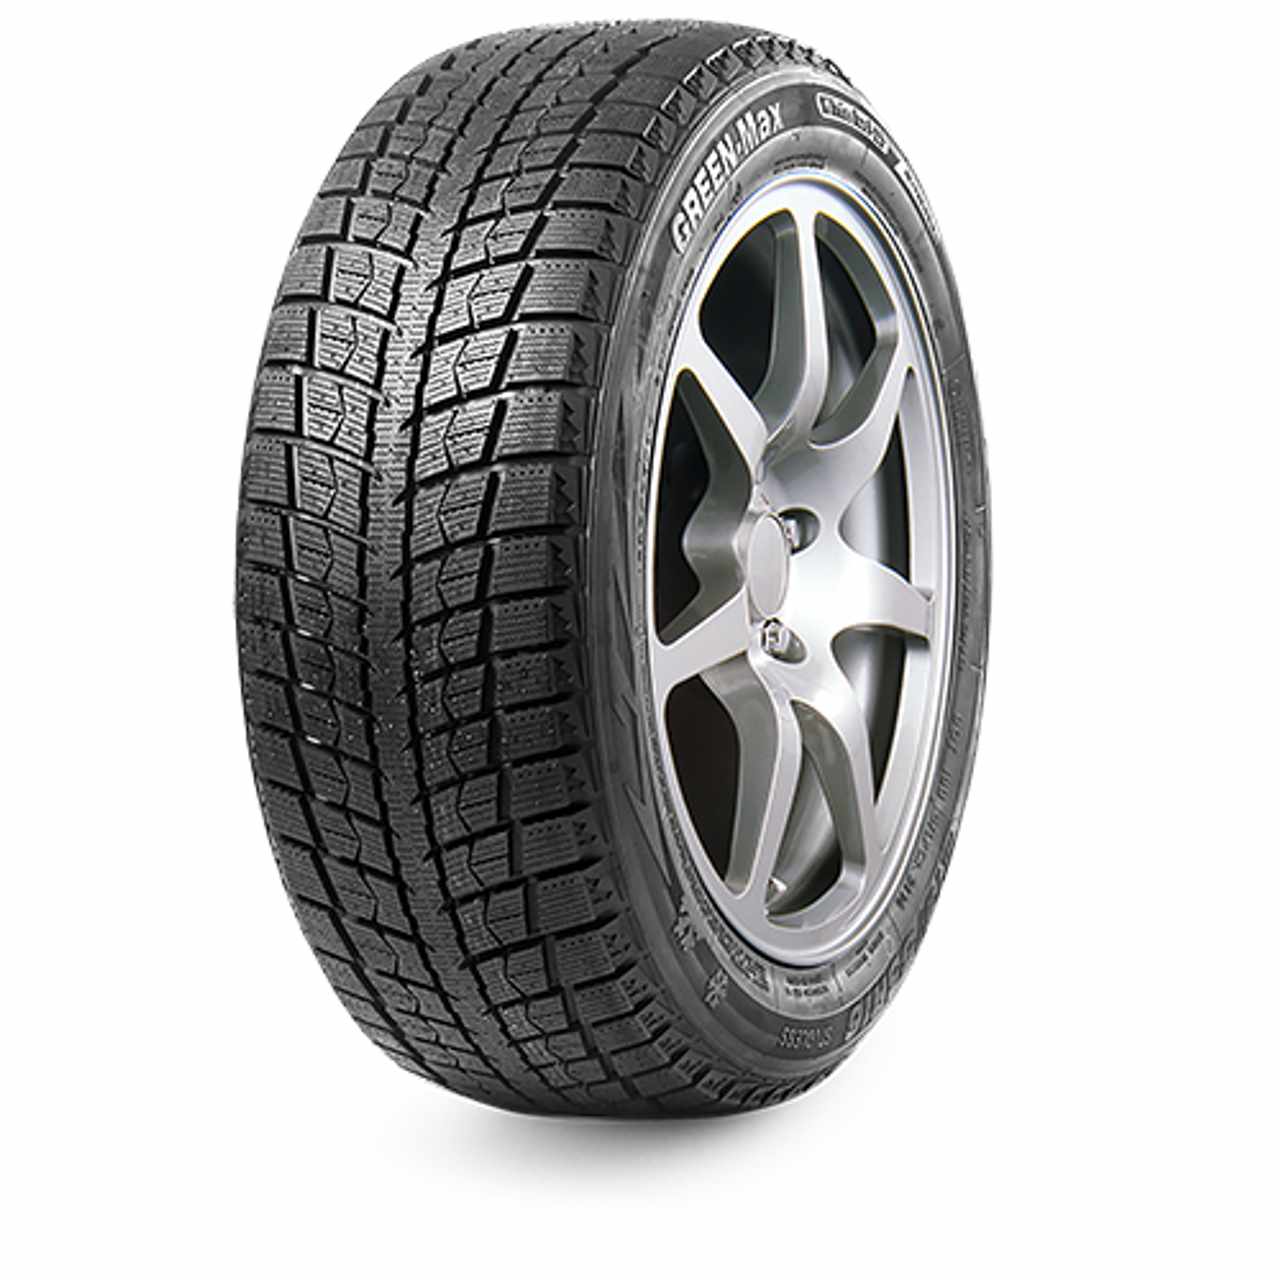 LINGLONG GREEN-MAX WINTER ICE I-15 SUV 235/50R17 96T NORDIC COMPOUND MFS BSW